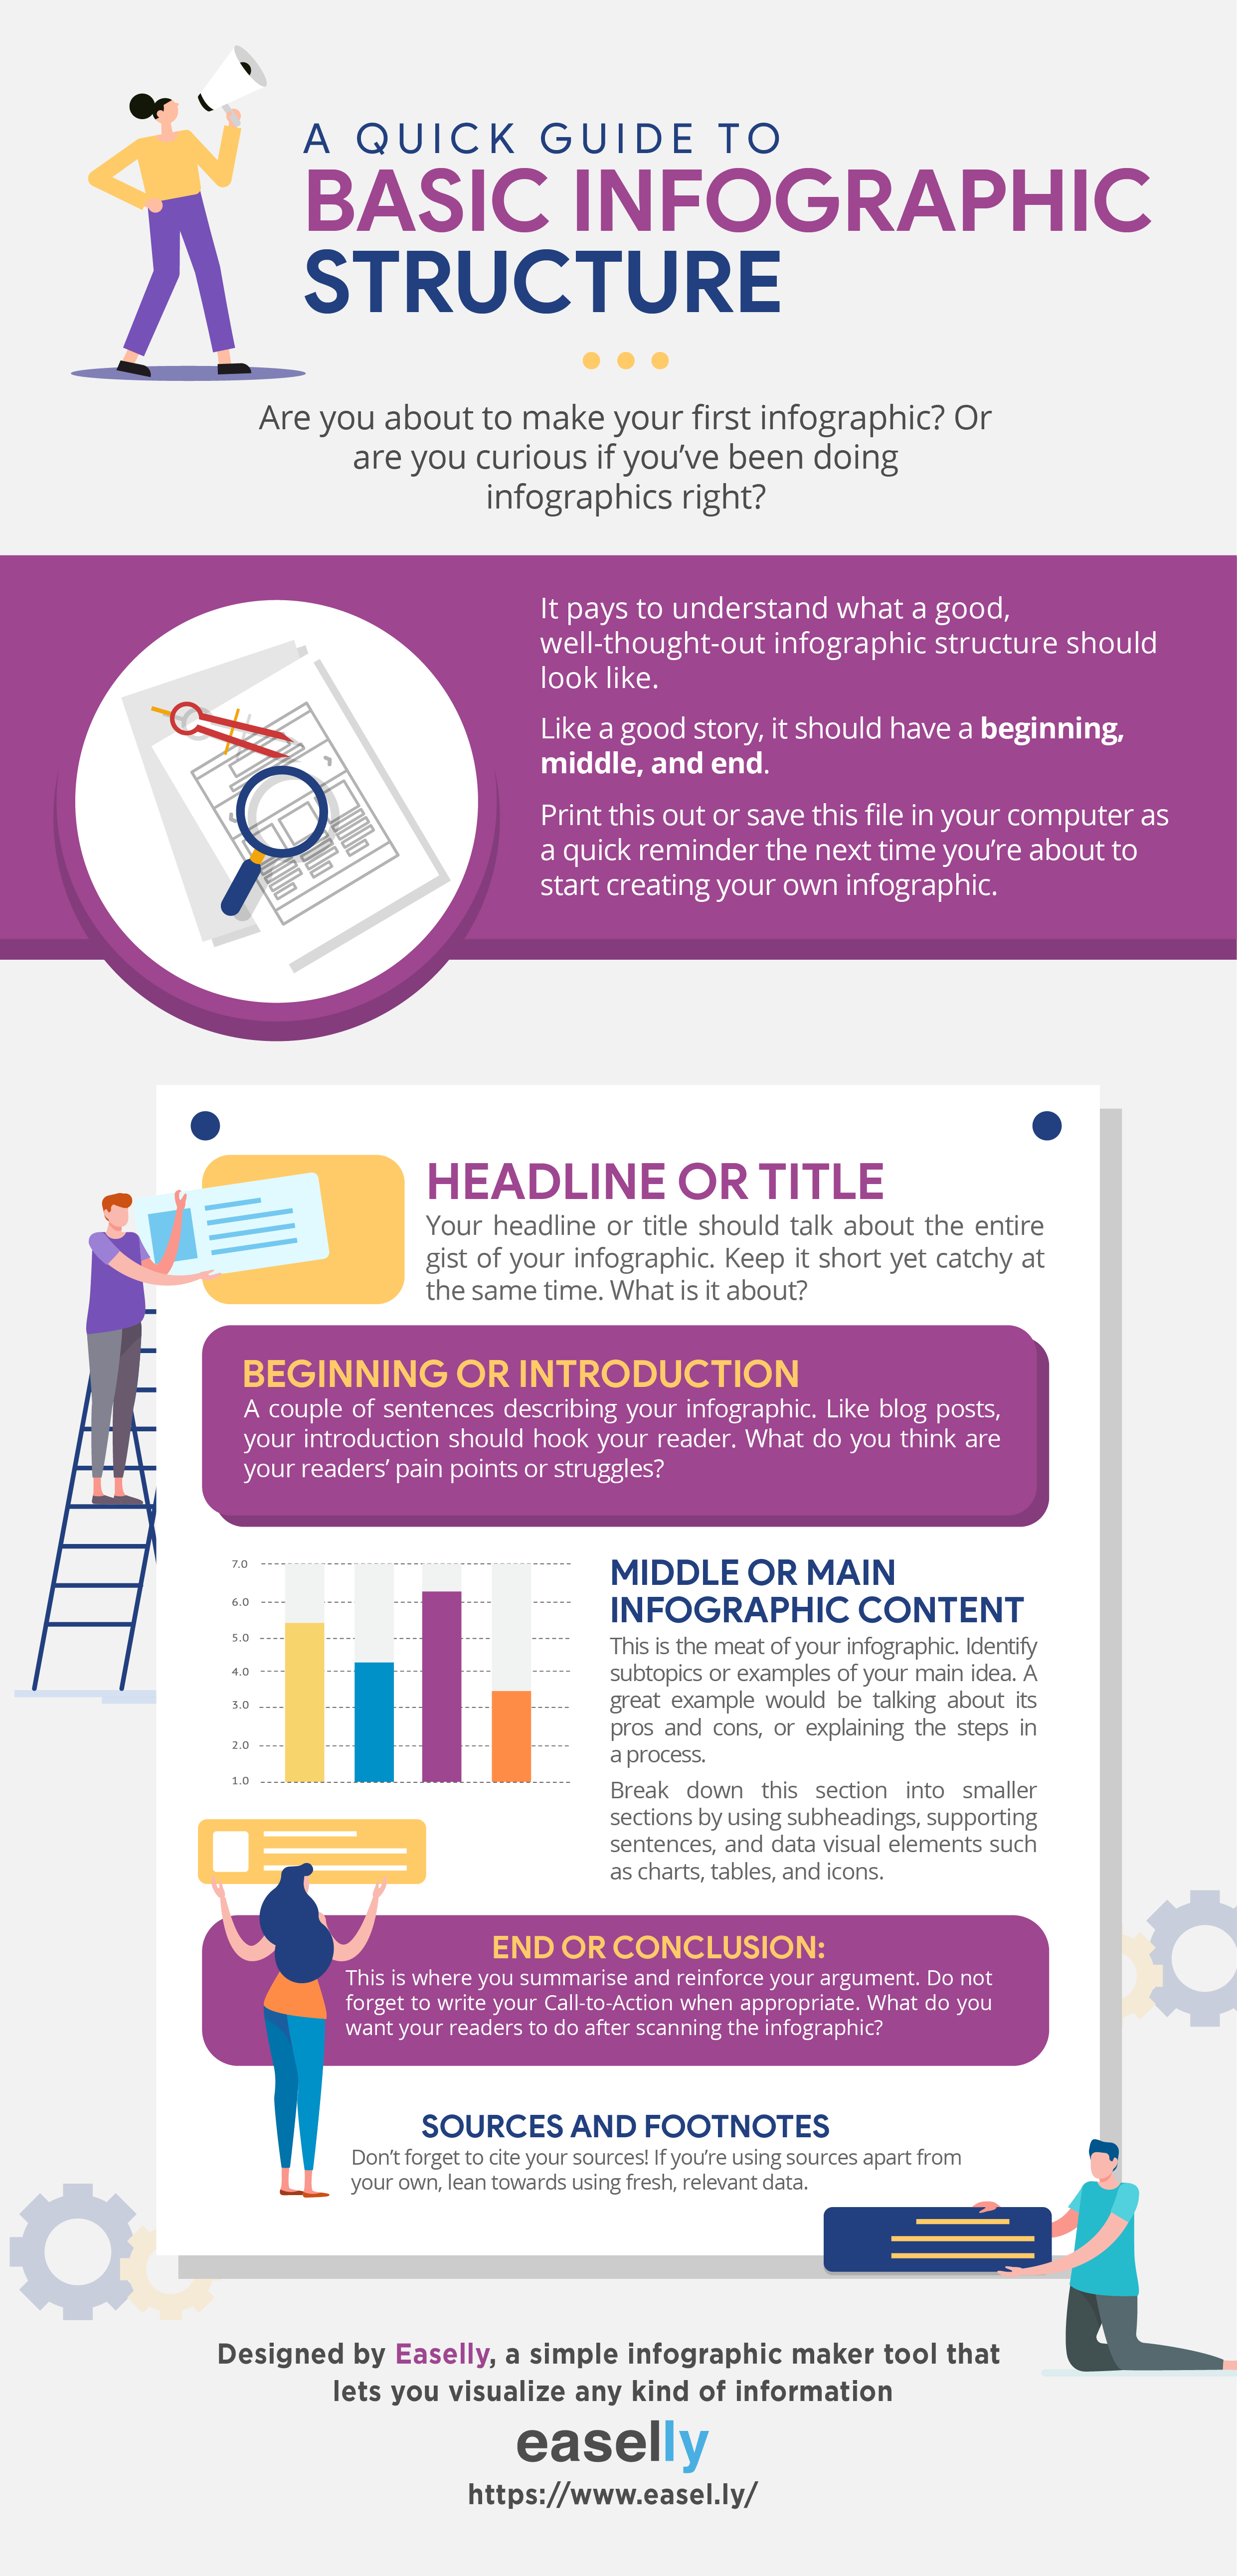 6 Step Process to Amazing Infographic Design - Business 2 Community